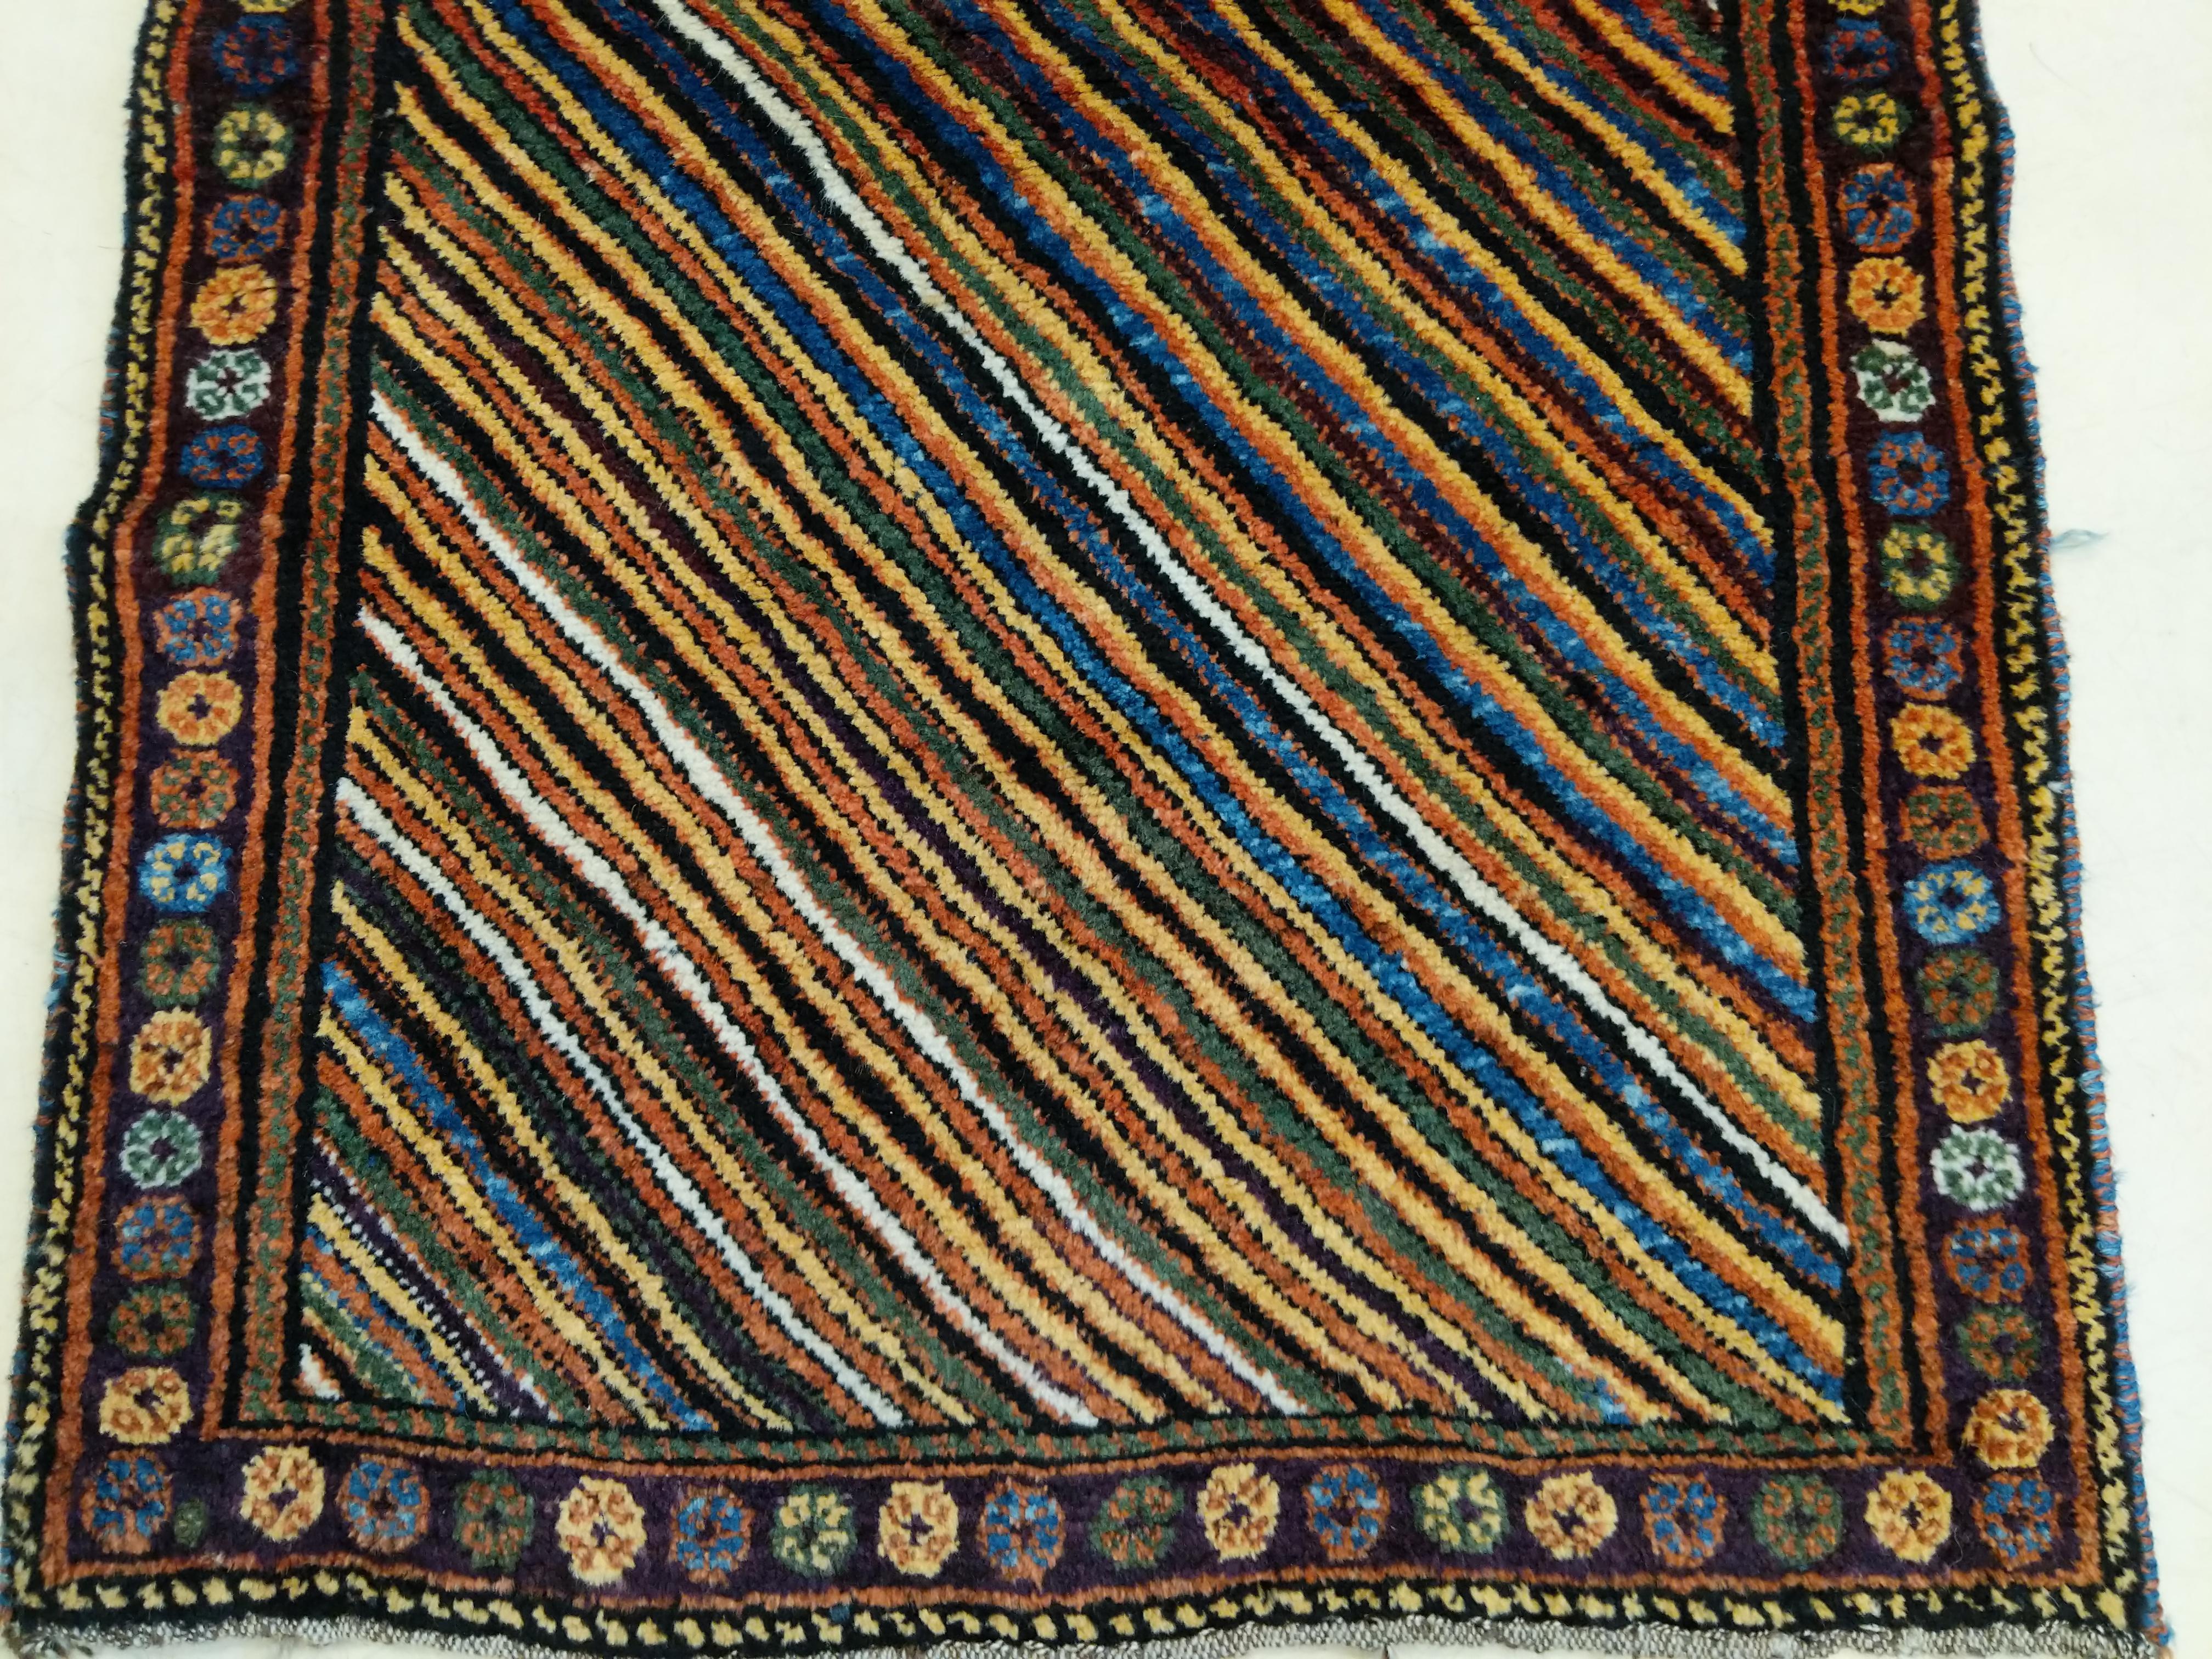 A Kurdish tribal rug distinguished by a rainbow pattern of polychrome diagonals, framed by a simple border composed of small octagons. The soft lush pile is typical of the best quality tribal weavings. It's the perfect runner for any kind of setting.